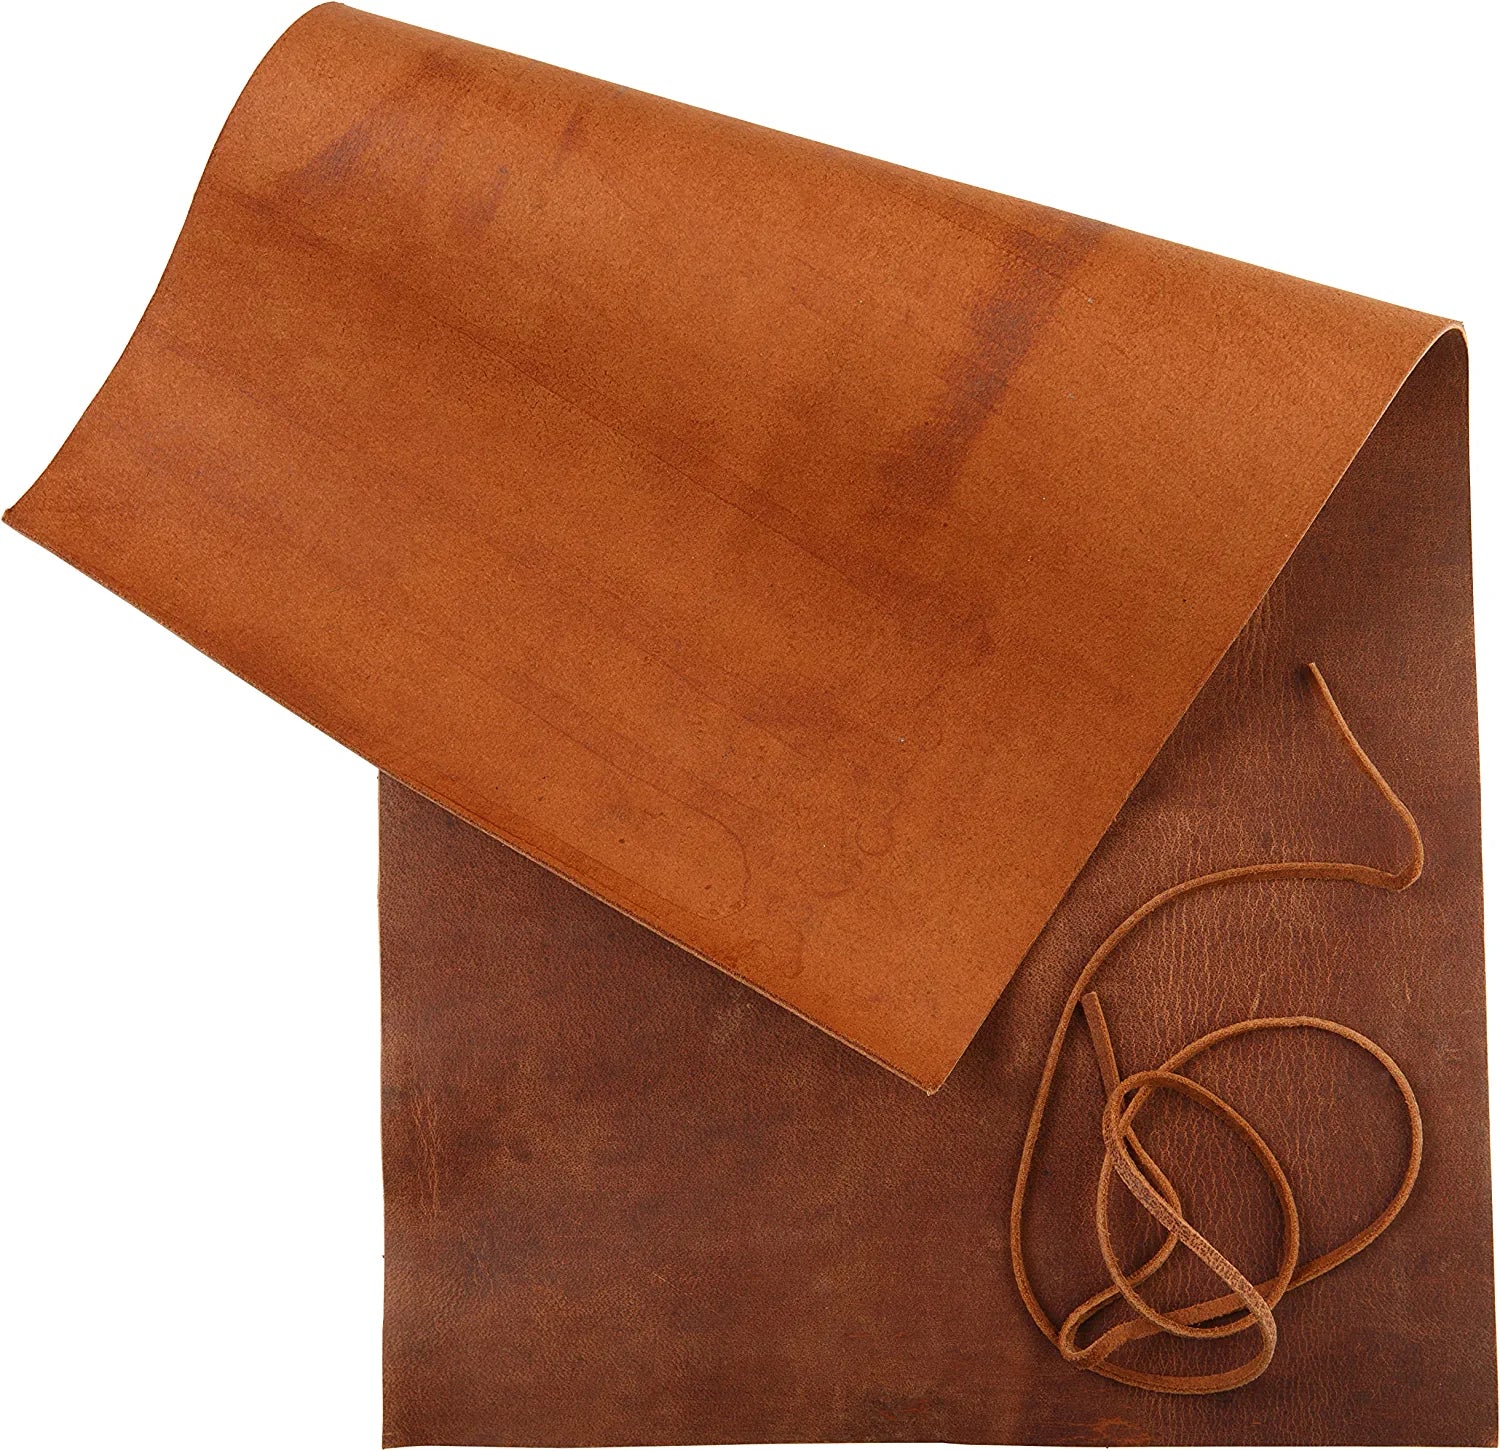  Leather Sheets for Crafts – Includes 3 Sheets (12x12)+ Leather  Cord (36) - Full Grain Buffalo Leather Squares - Great for Jewelry, Leather  Wallets, Leatherworking Arts and Crafts